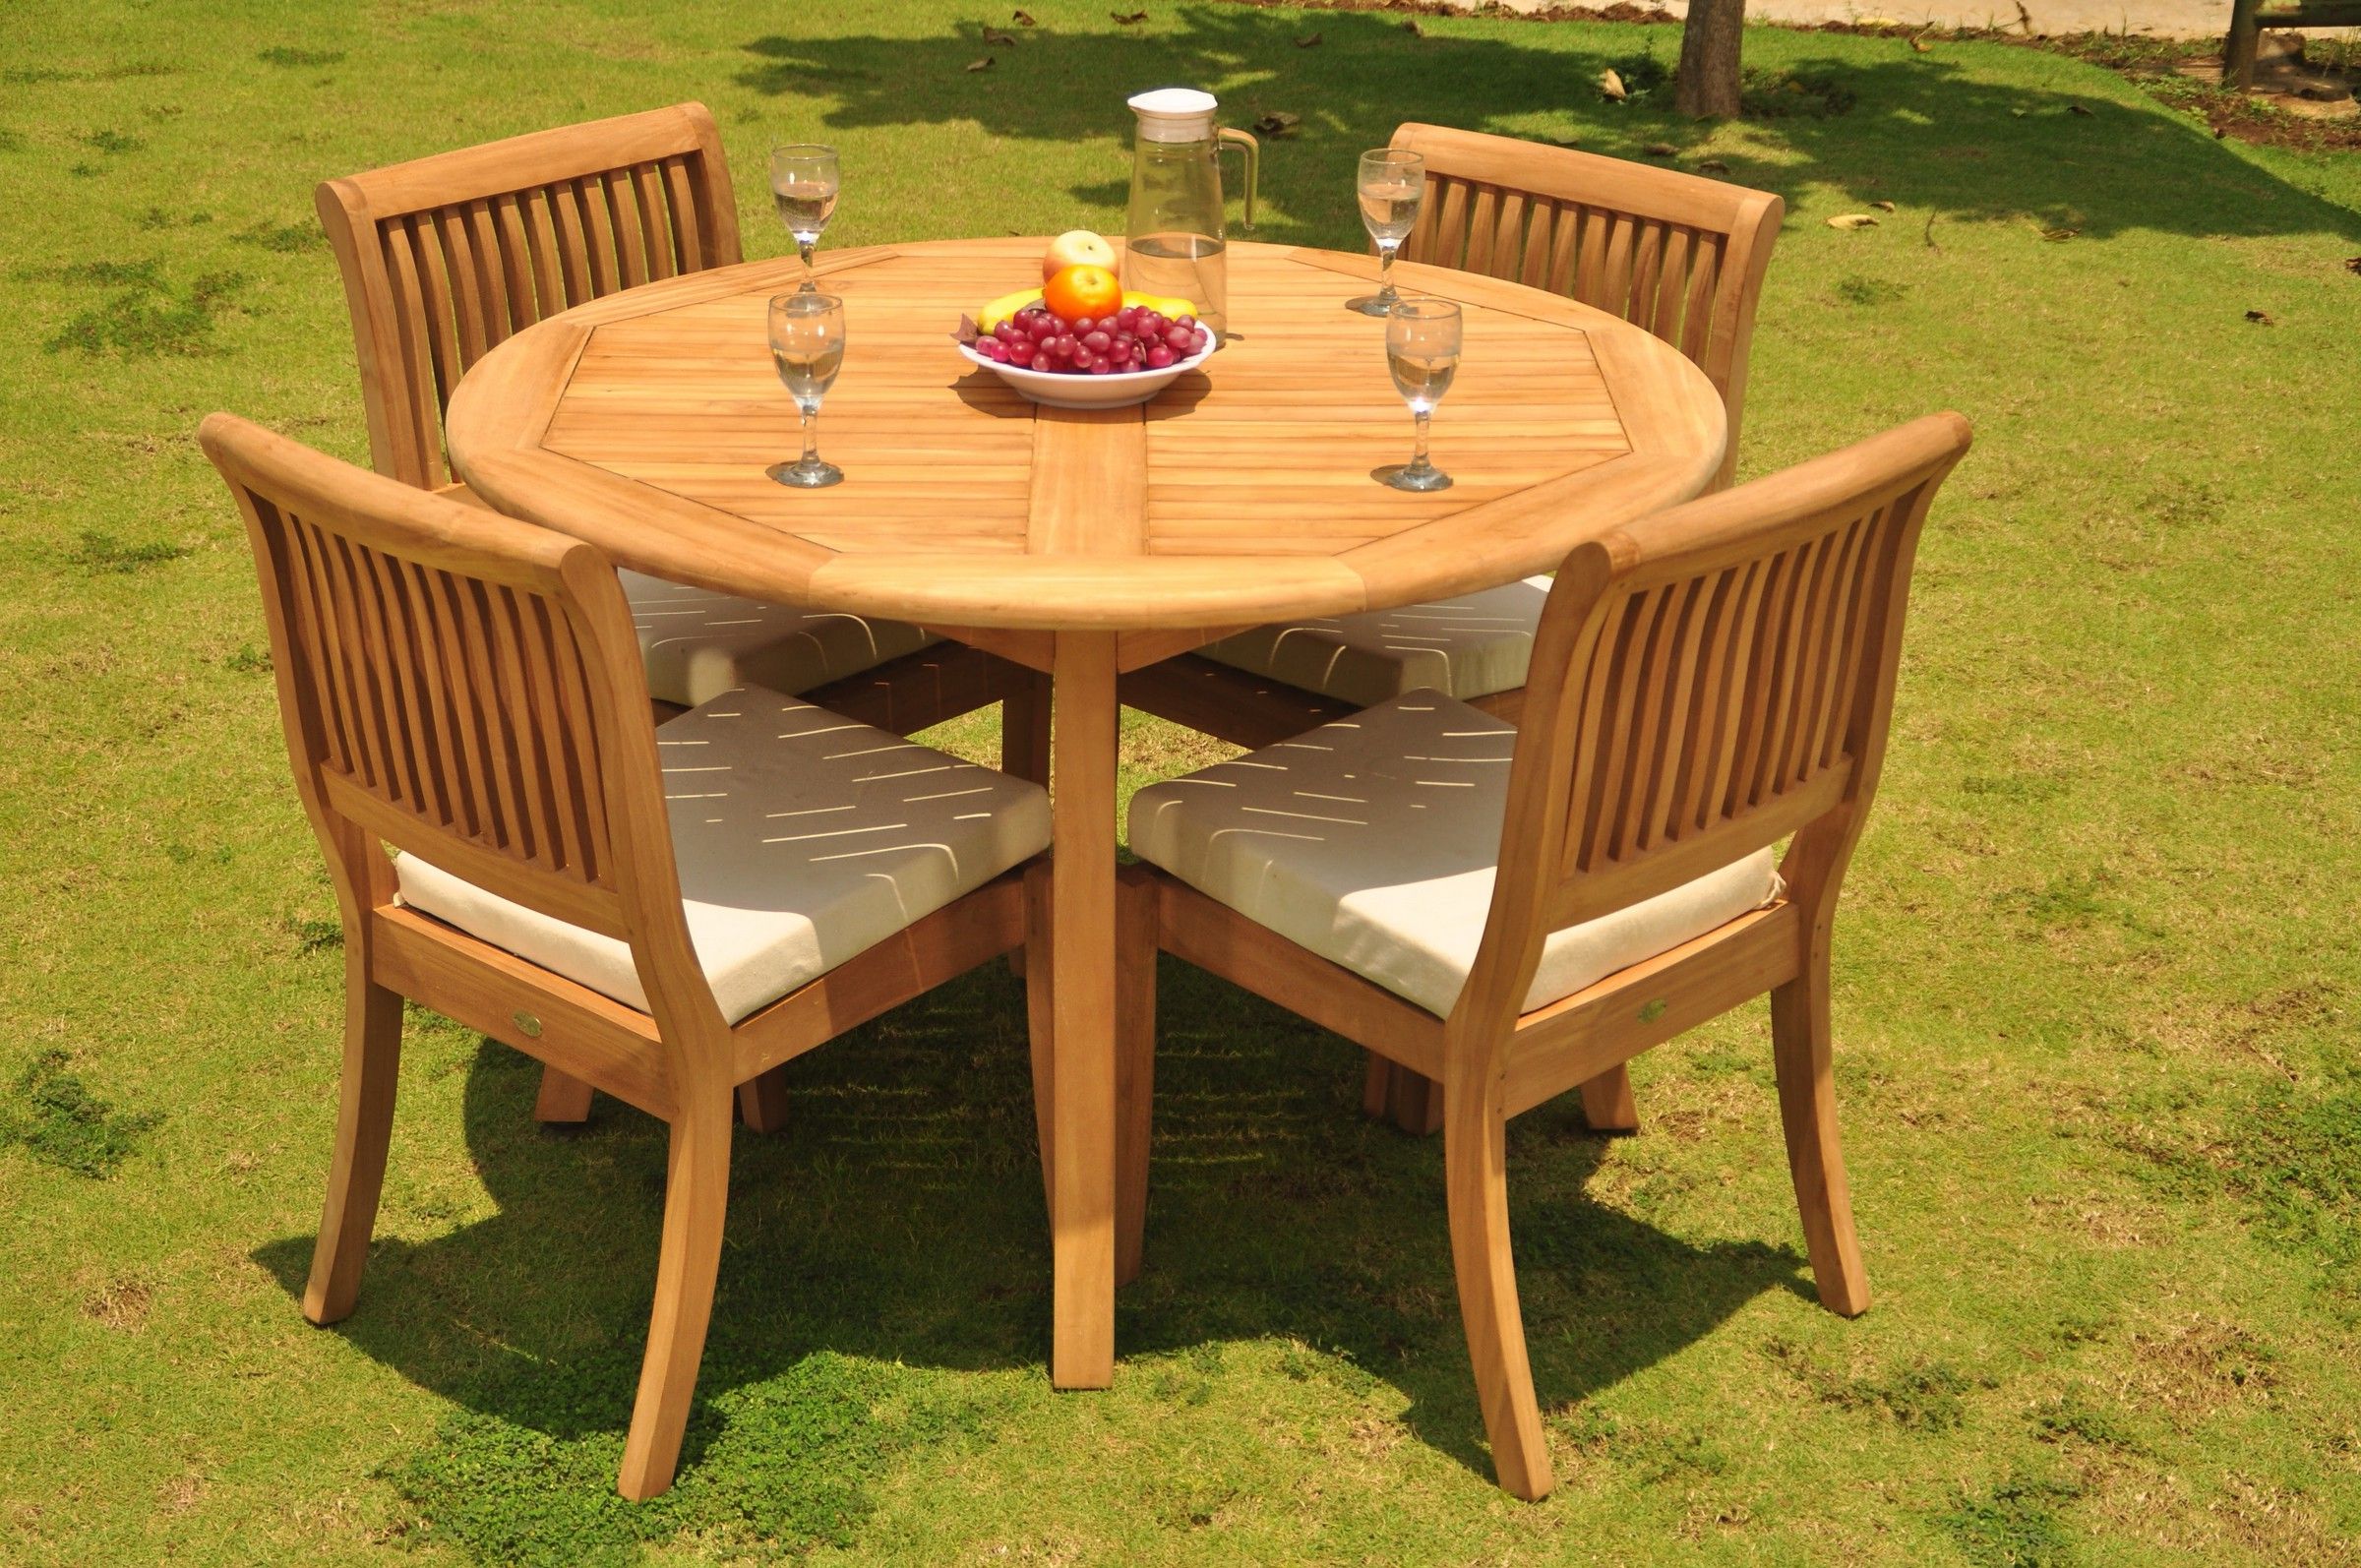 Teak Dining Set: 4 Seater 5 Pc: 48" Round Table And 4 Arbor Armless Pertaining To Latest Teak Wood Outdoor Table And Chairs Sets (View 2 of 15)